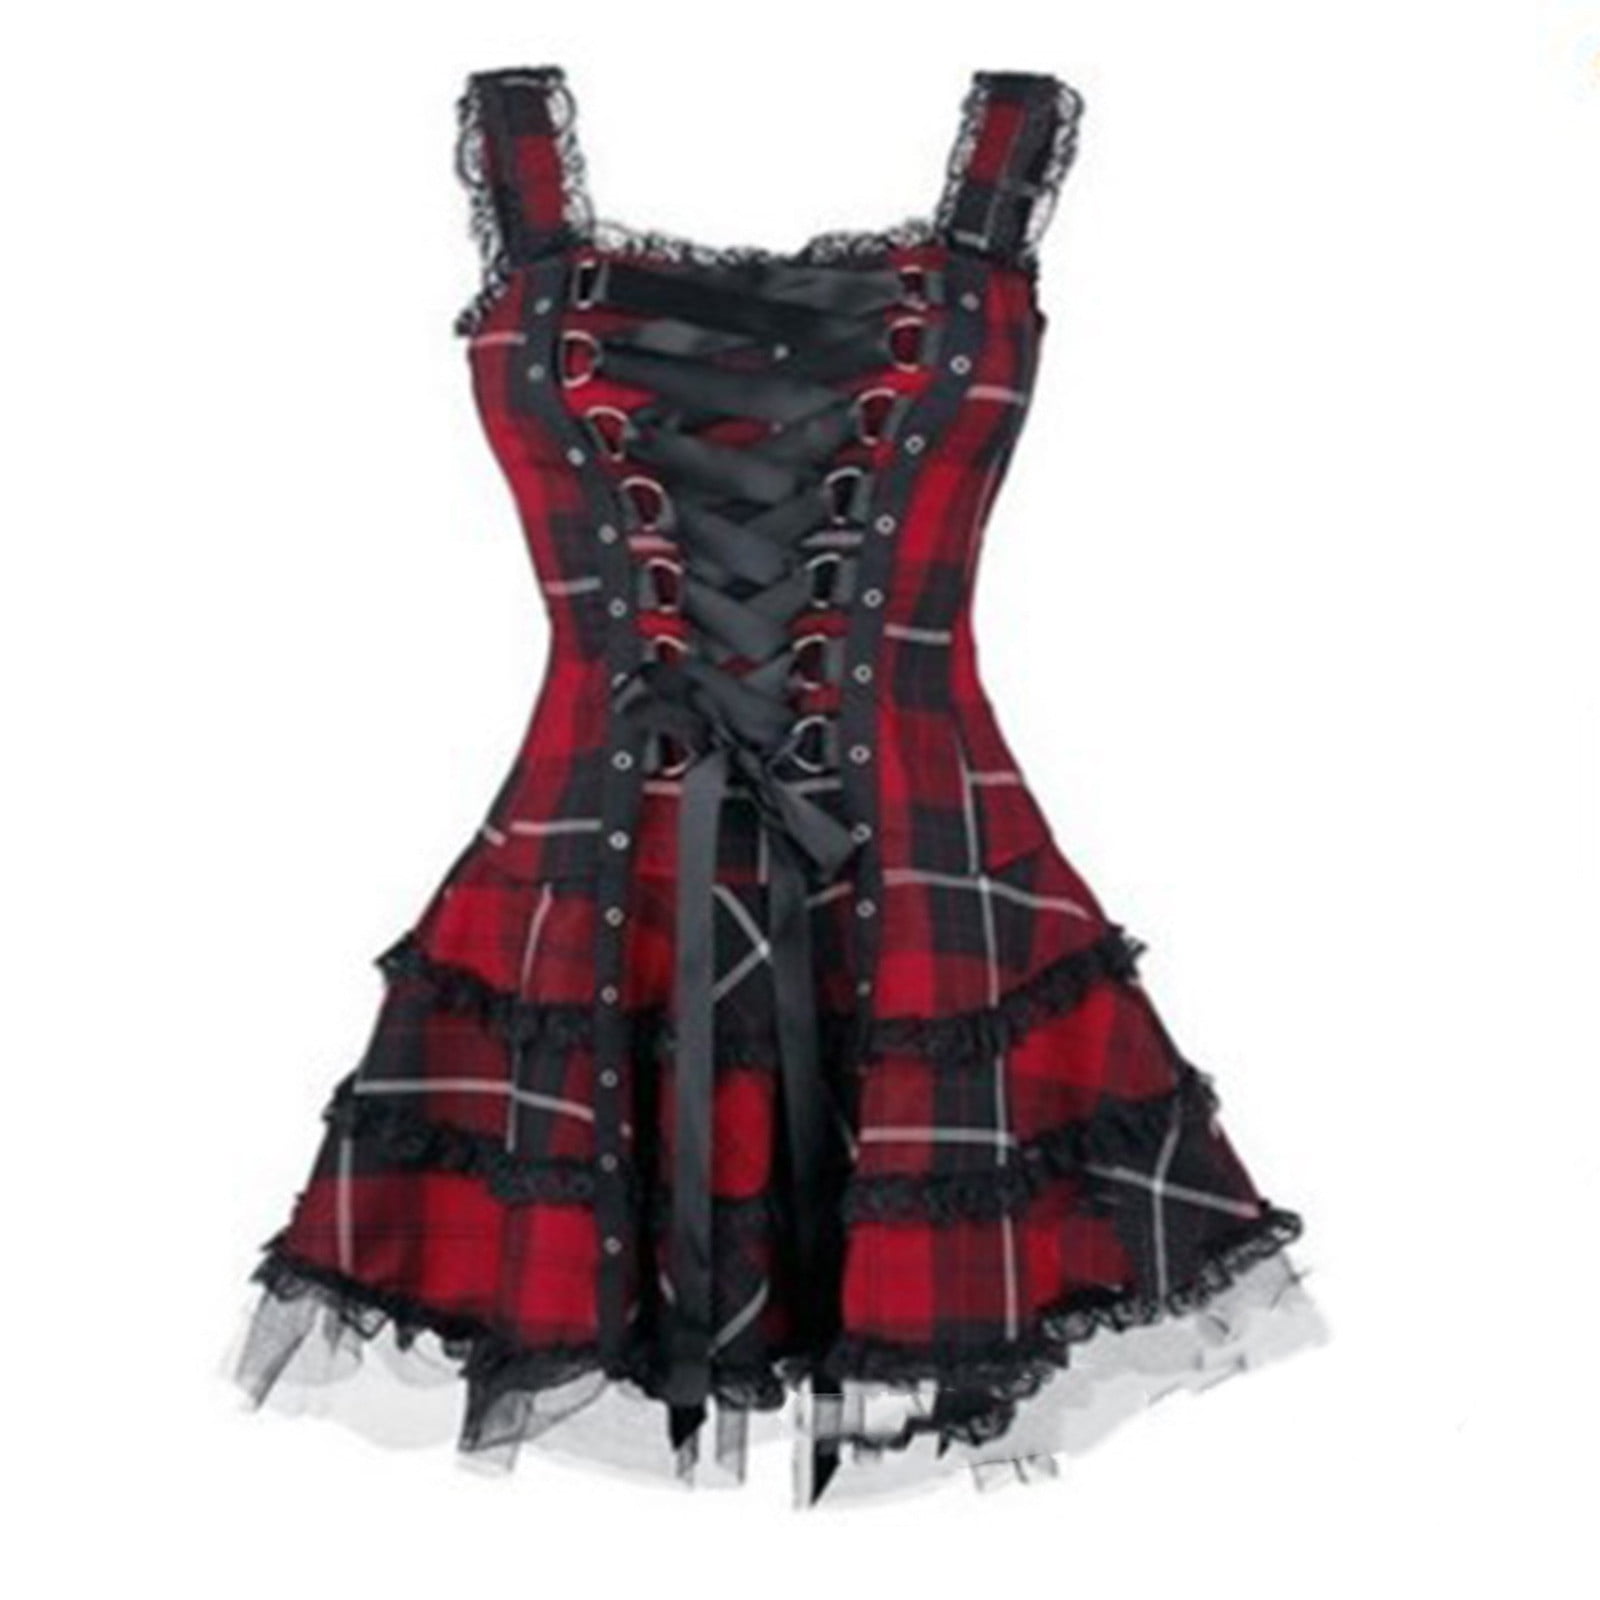 Women's Goth Corset Dress Lace Halter Emo Sleeveless Gothic Dresses  SteamPunk Gothic Vampire Witch Costume for Women 